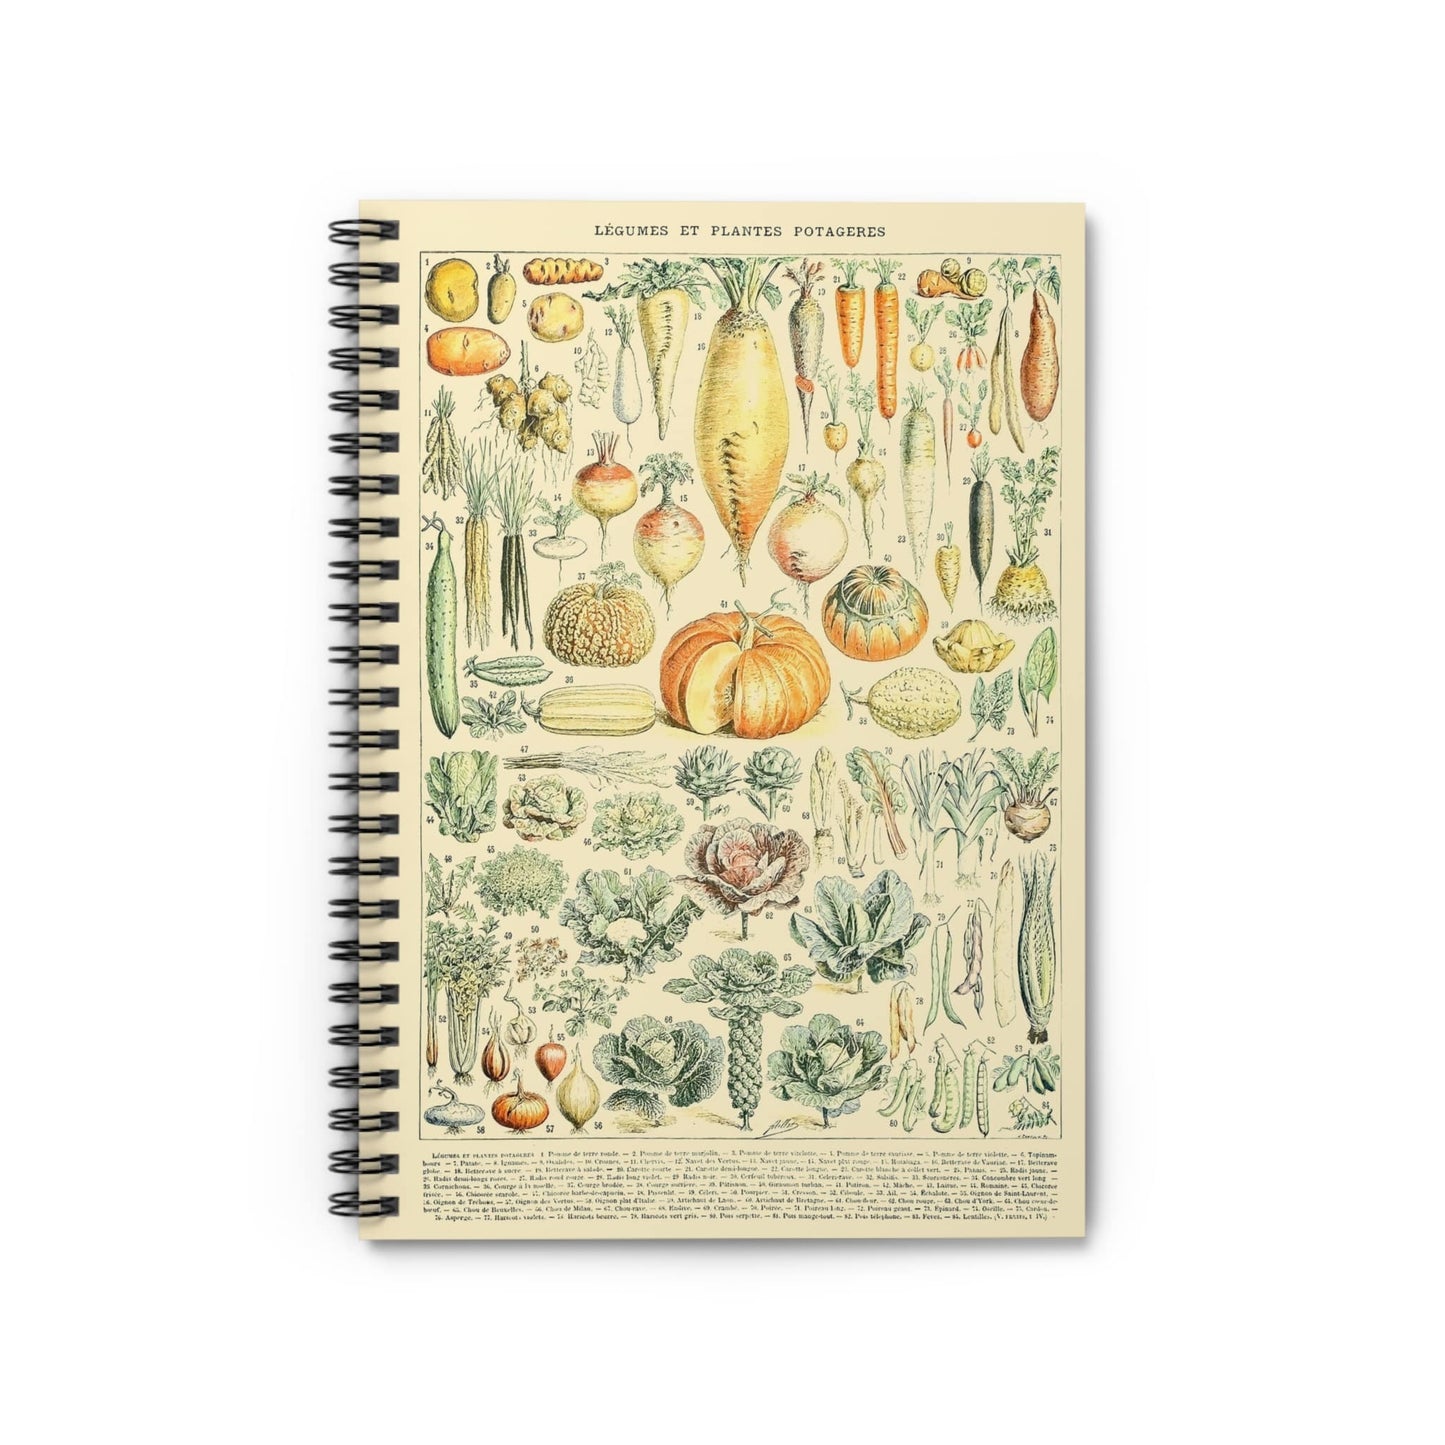 Vegetables Notebook with Garden Variety cover, ideal for journaling and planning, featuring a variety of garden vegetables.